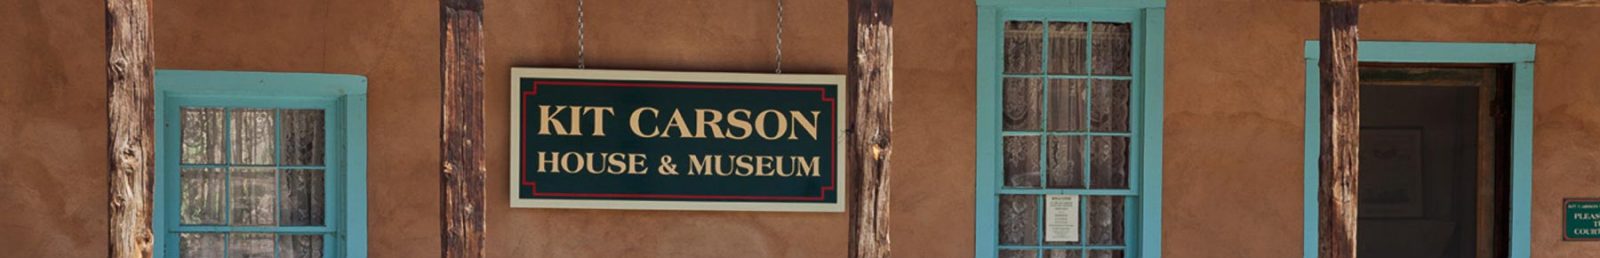 Kit Carson House and Museum